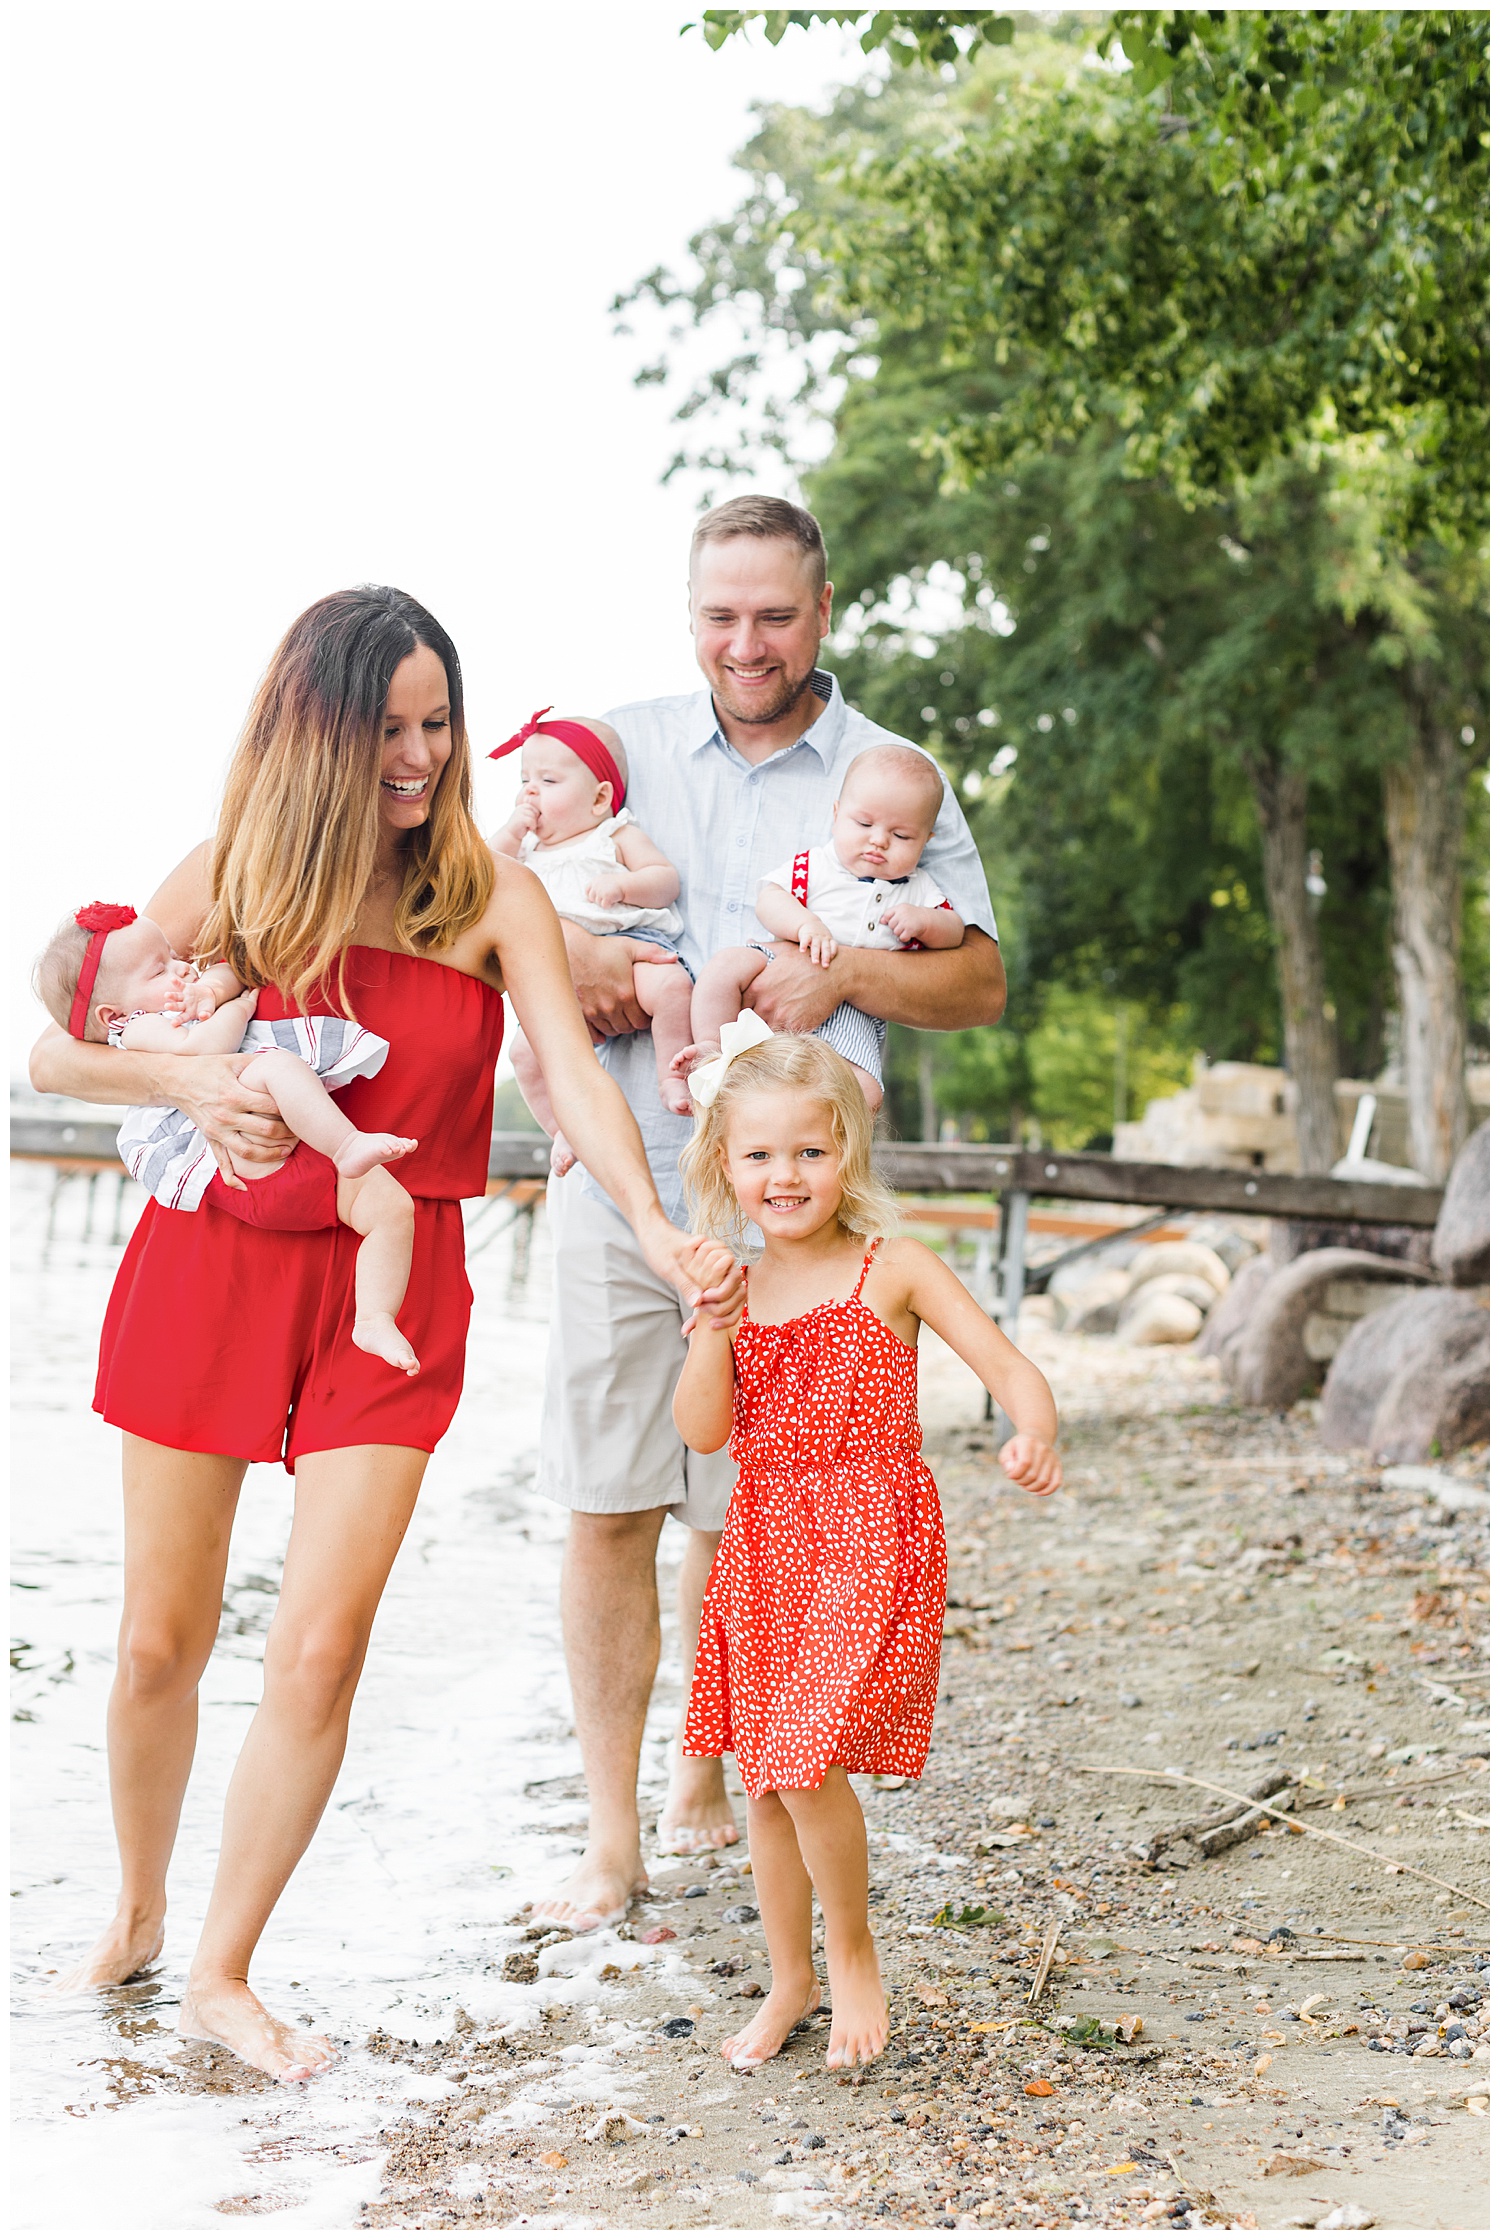 The Wissink triplet family walk along the shores of Clear Lake, Iowa | CB Studio